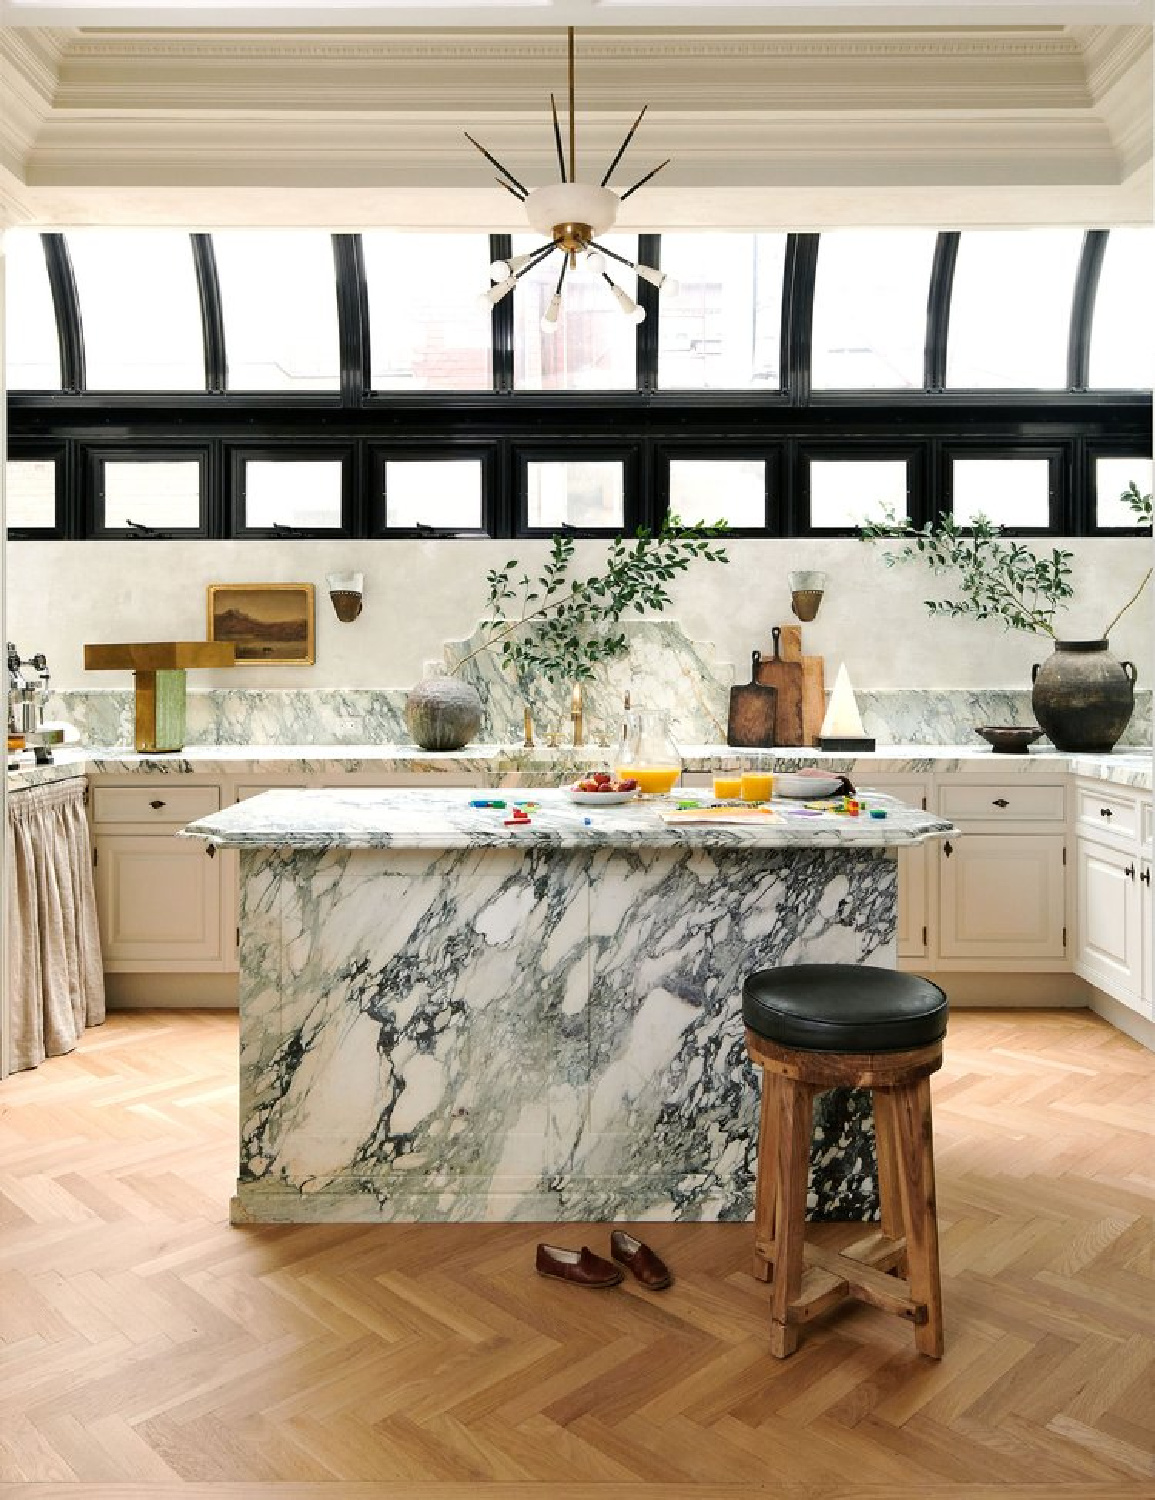 Nate Berkus Jeremiah Brent Manhattan kitchen with black greenhouse-like windows, Calacatta Paonazzo marble counters, white cabinets, and creamy plaster walls - in AD (photo by Kelly Marshall).